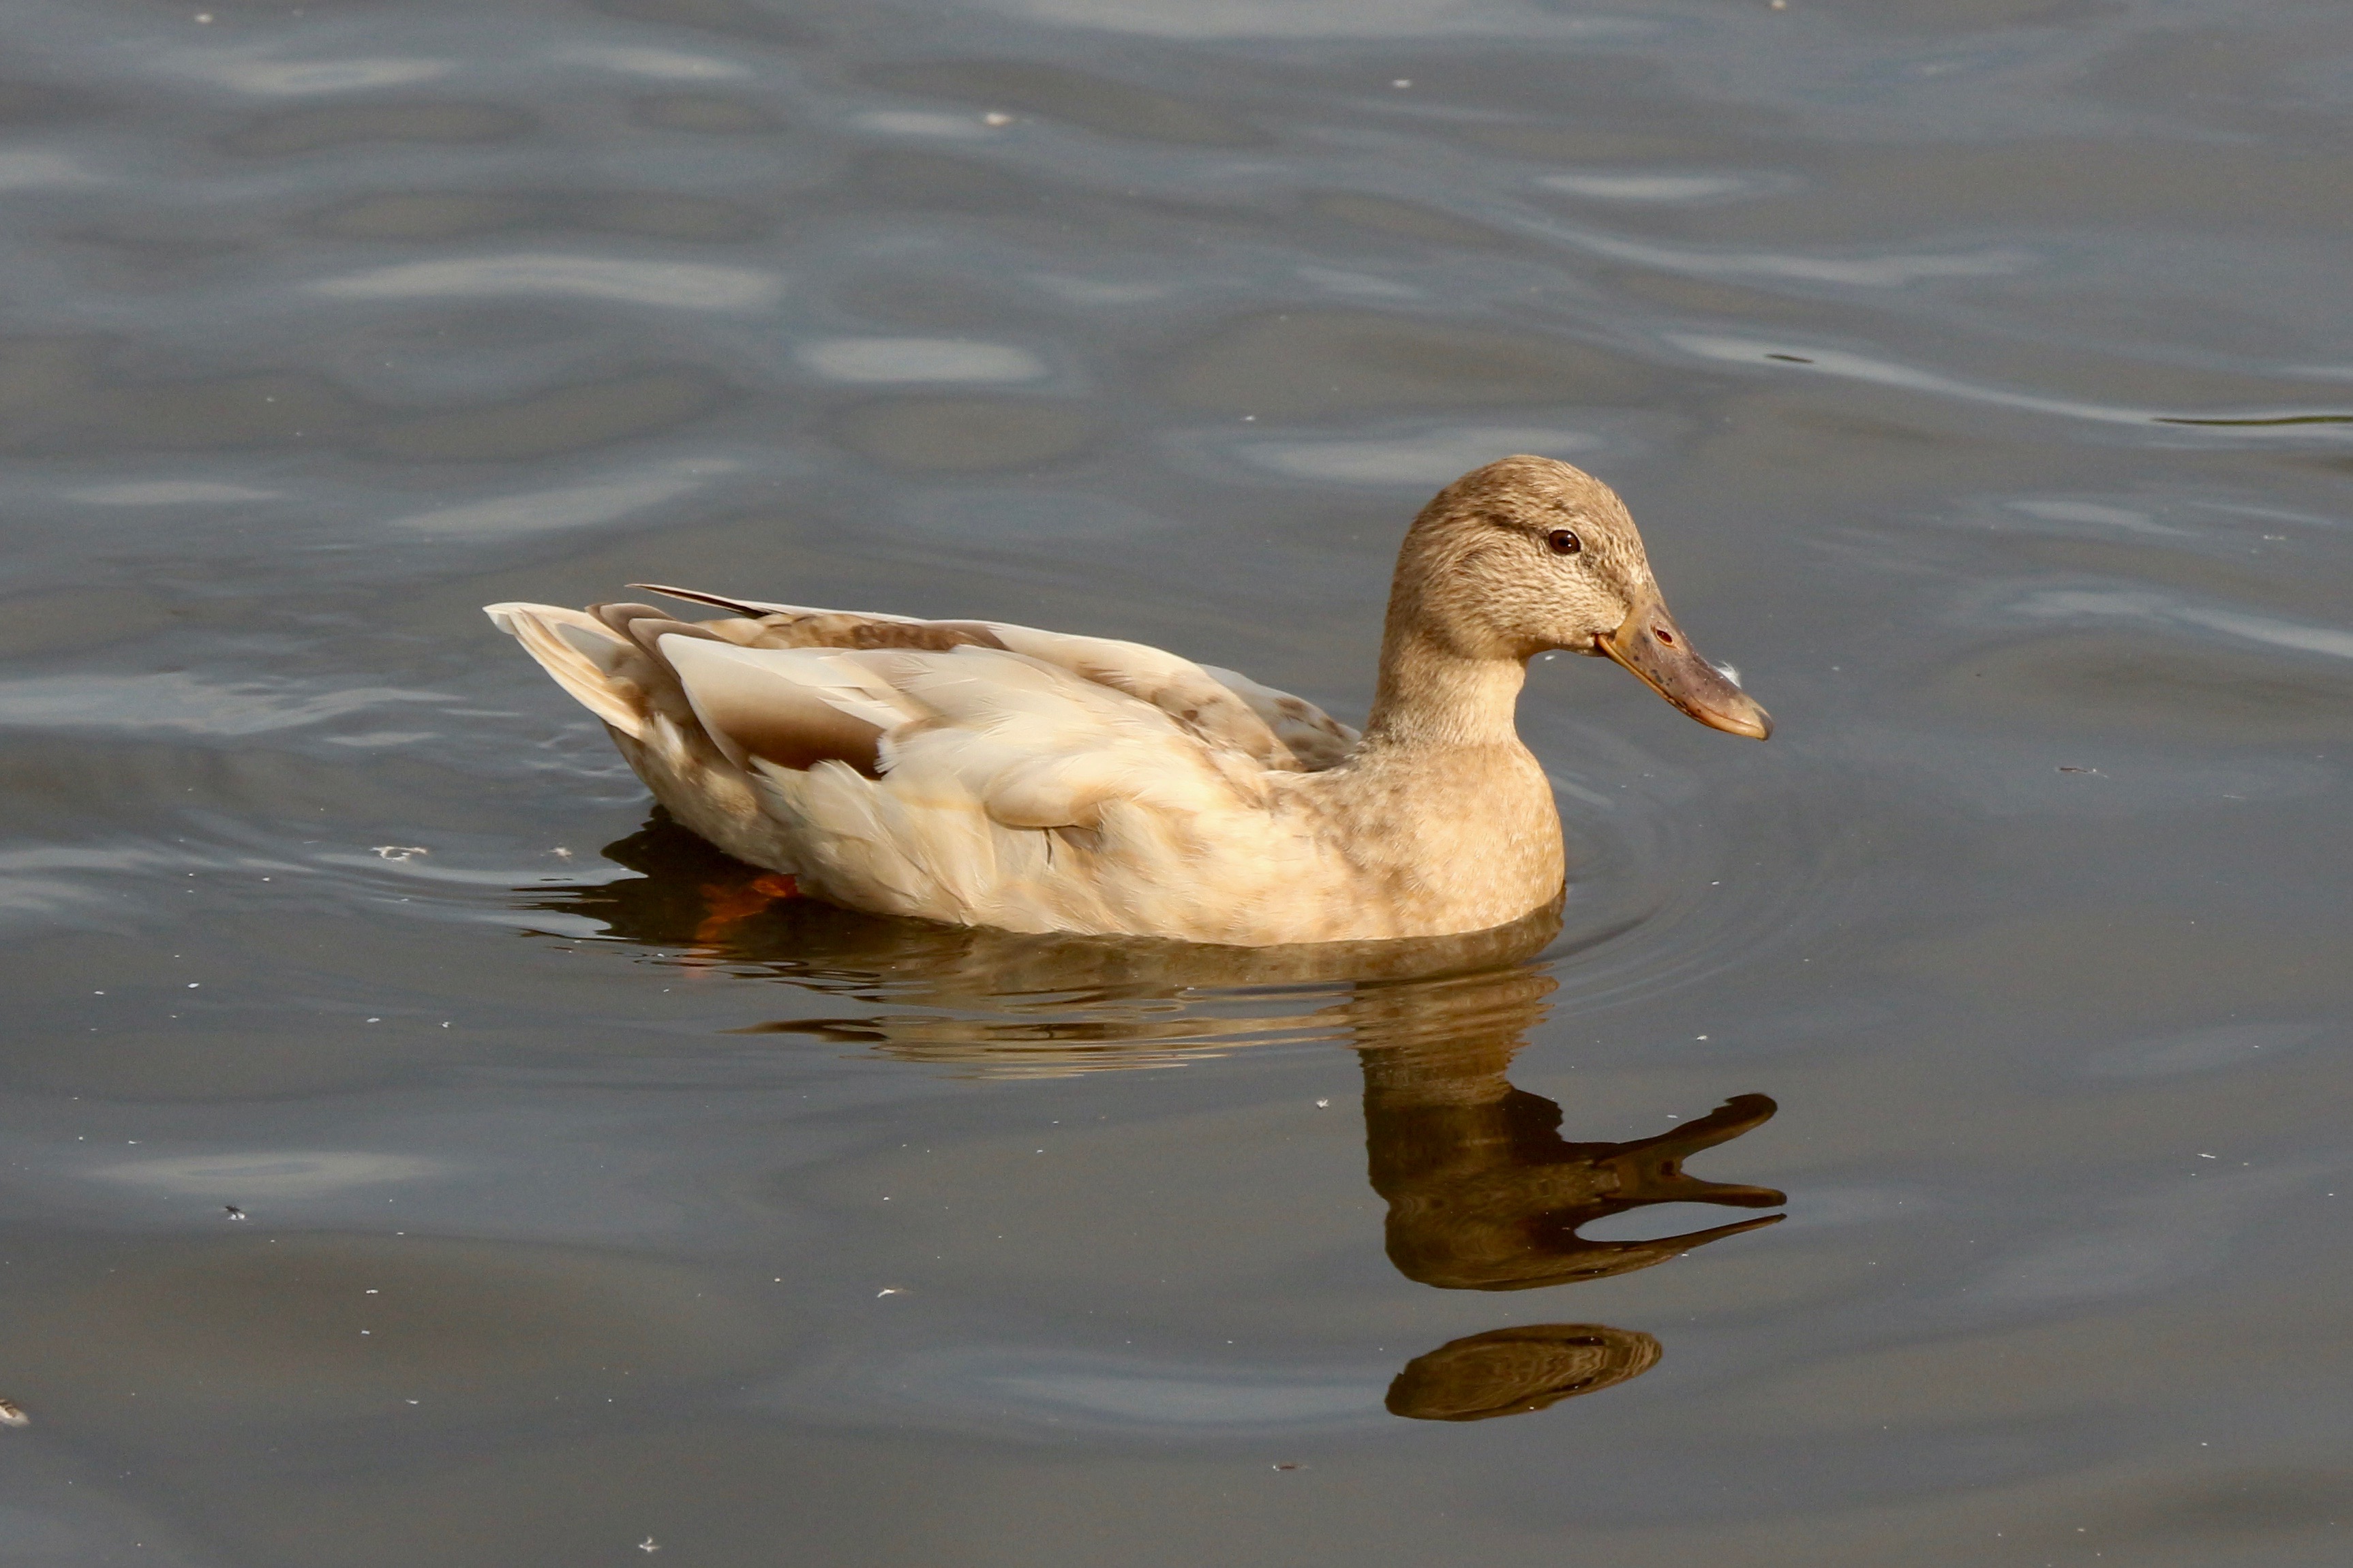 A leucistic female mallard floats in water. It is not an albino duck because albino ducks have a complete absence of melanin (all its feathers would be light and its eyes would be pink) whereas this one has some patches of darker feathers and it has brown eyes, indicating decreased melanin rather than a complete lack of it altogether.
